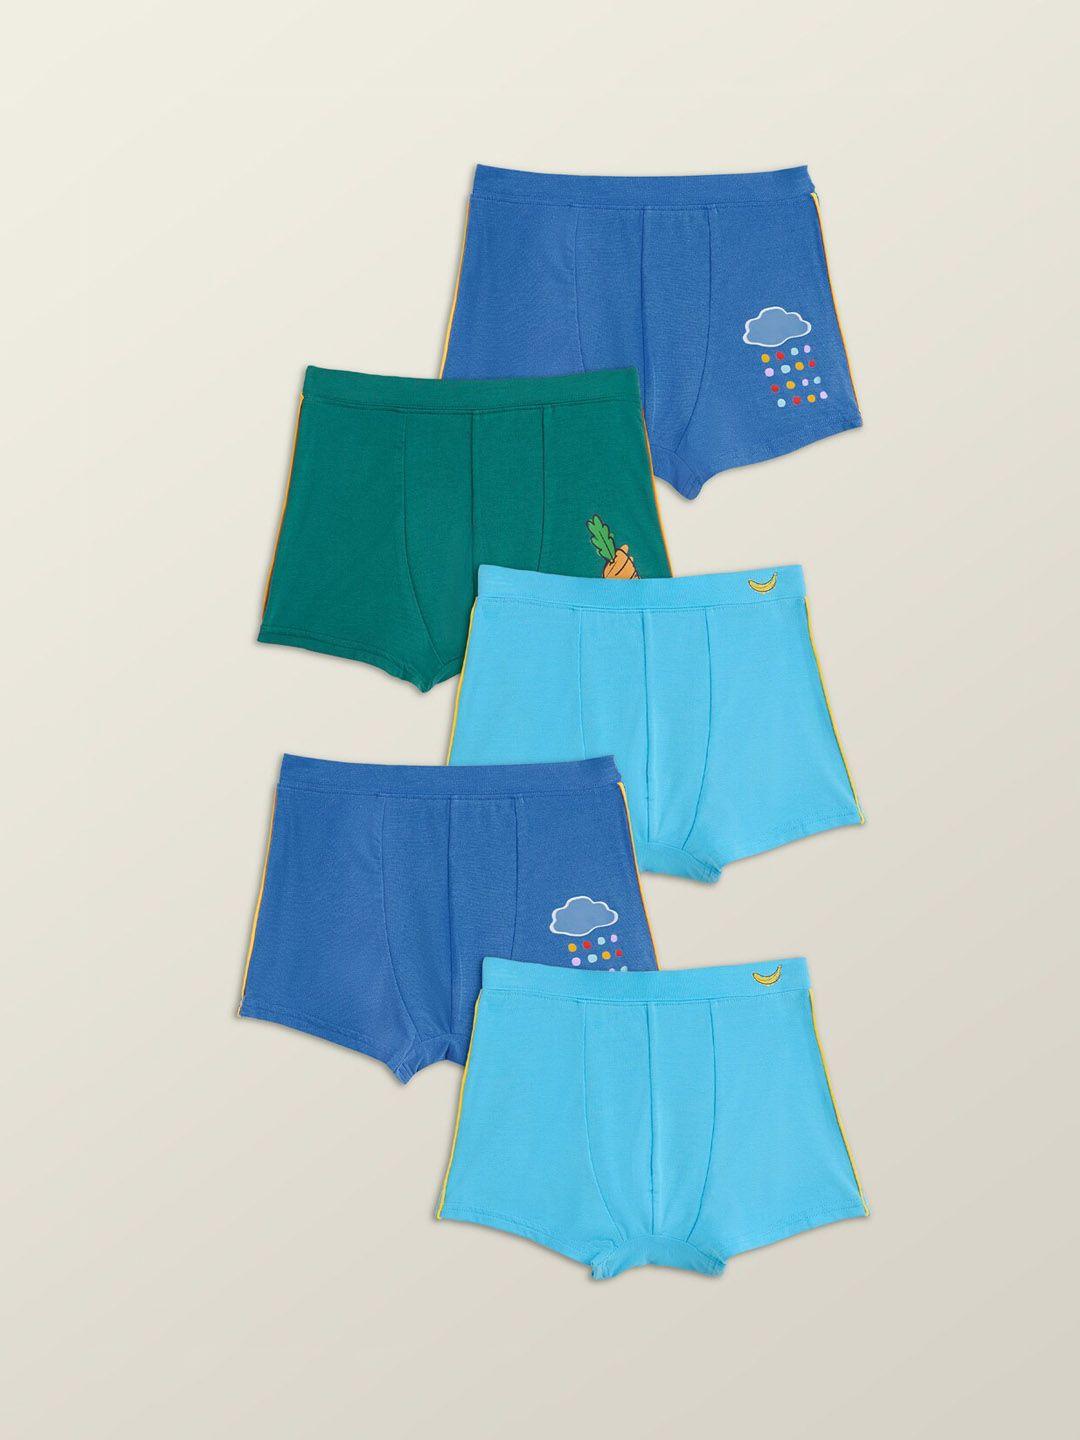 xy life boys pack of 5 mid-rise intelli soft technology trunks lbtrnk5pckn05_